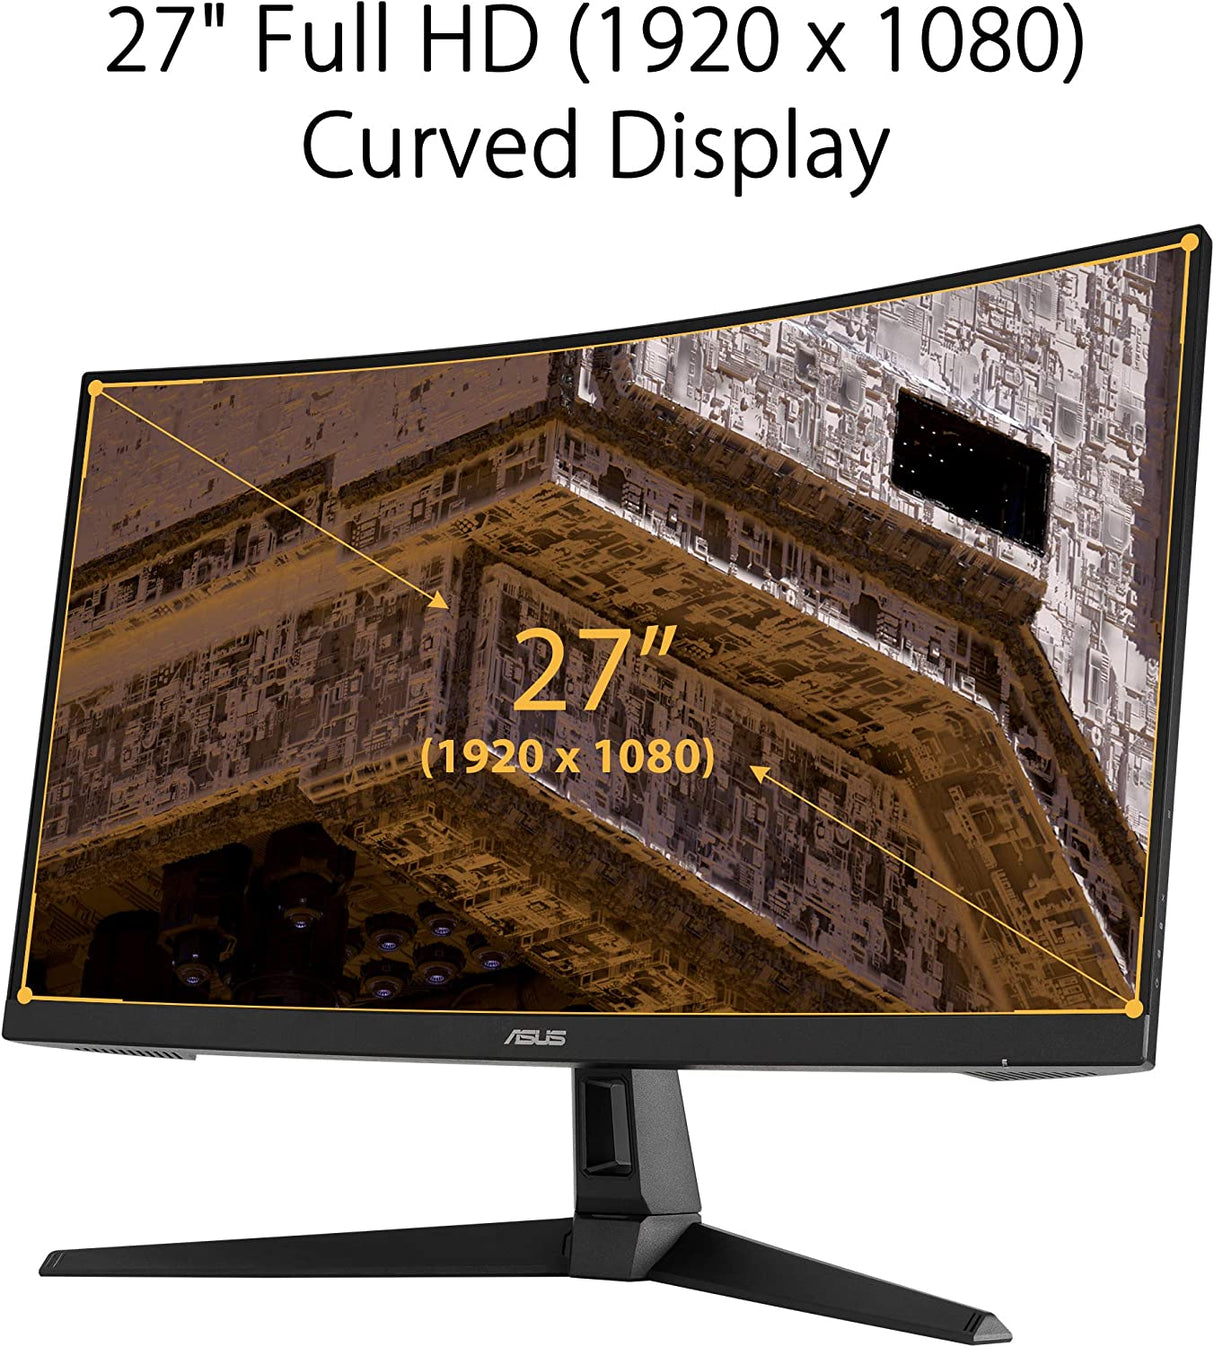 ASUS TUF Gaming VG27VH1B 27” Curved Monitor, 1080P Full HD, 165Hz (Supports 144Hz), Extreme Low Motion Blur, Adaptive-sync, FreeSync Premium, 1ms, Eye Care, HDMI D-Sub, BLACK